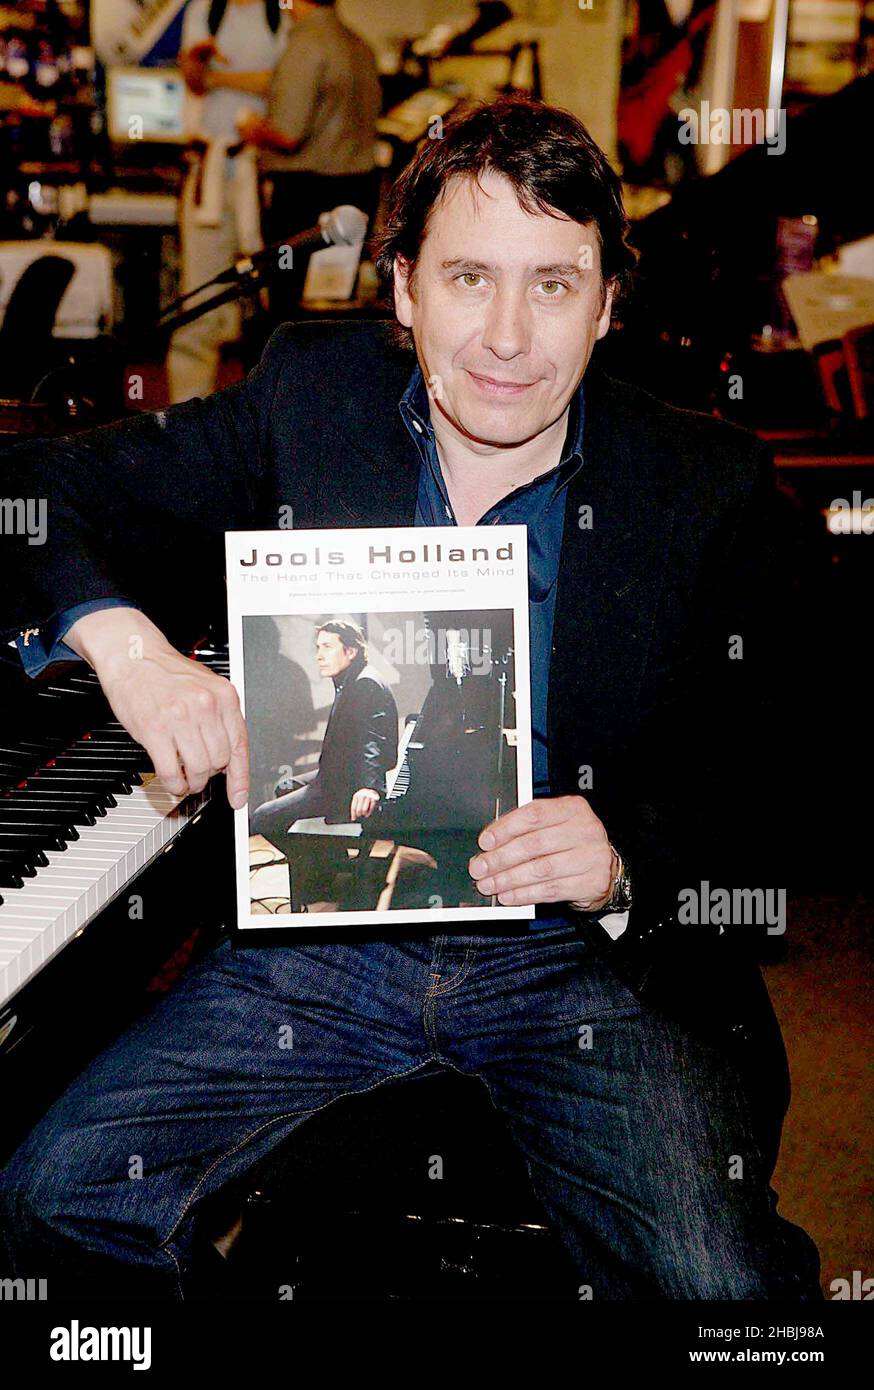 Jools Holland signs copies of first ever book of compositions,'The Hand That Changed its Mind' at Chappells of Bond Street, London. Stock Photo